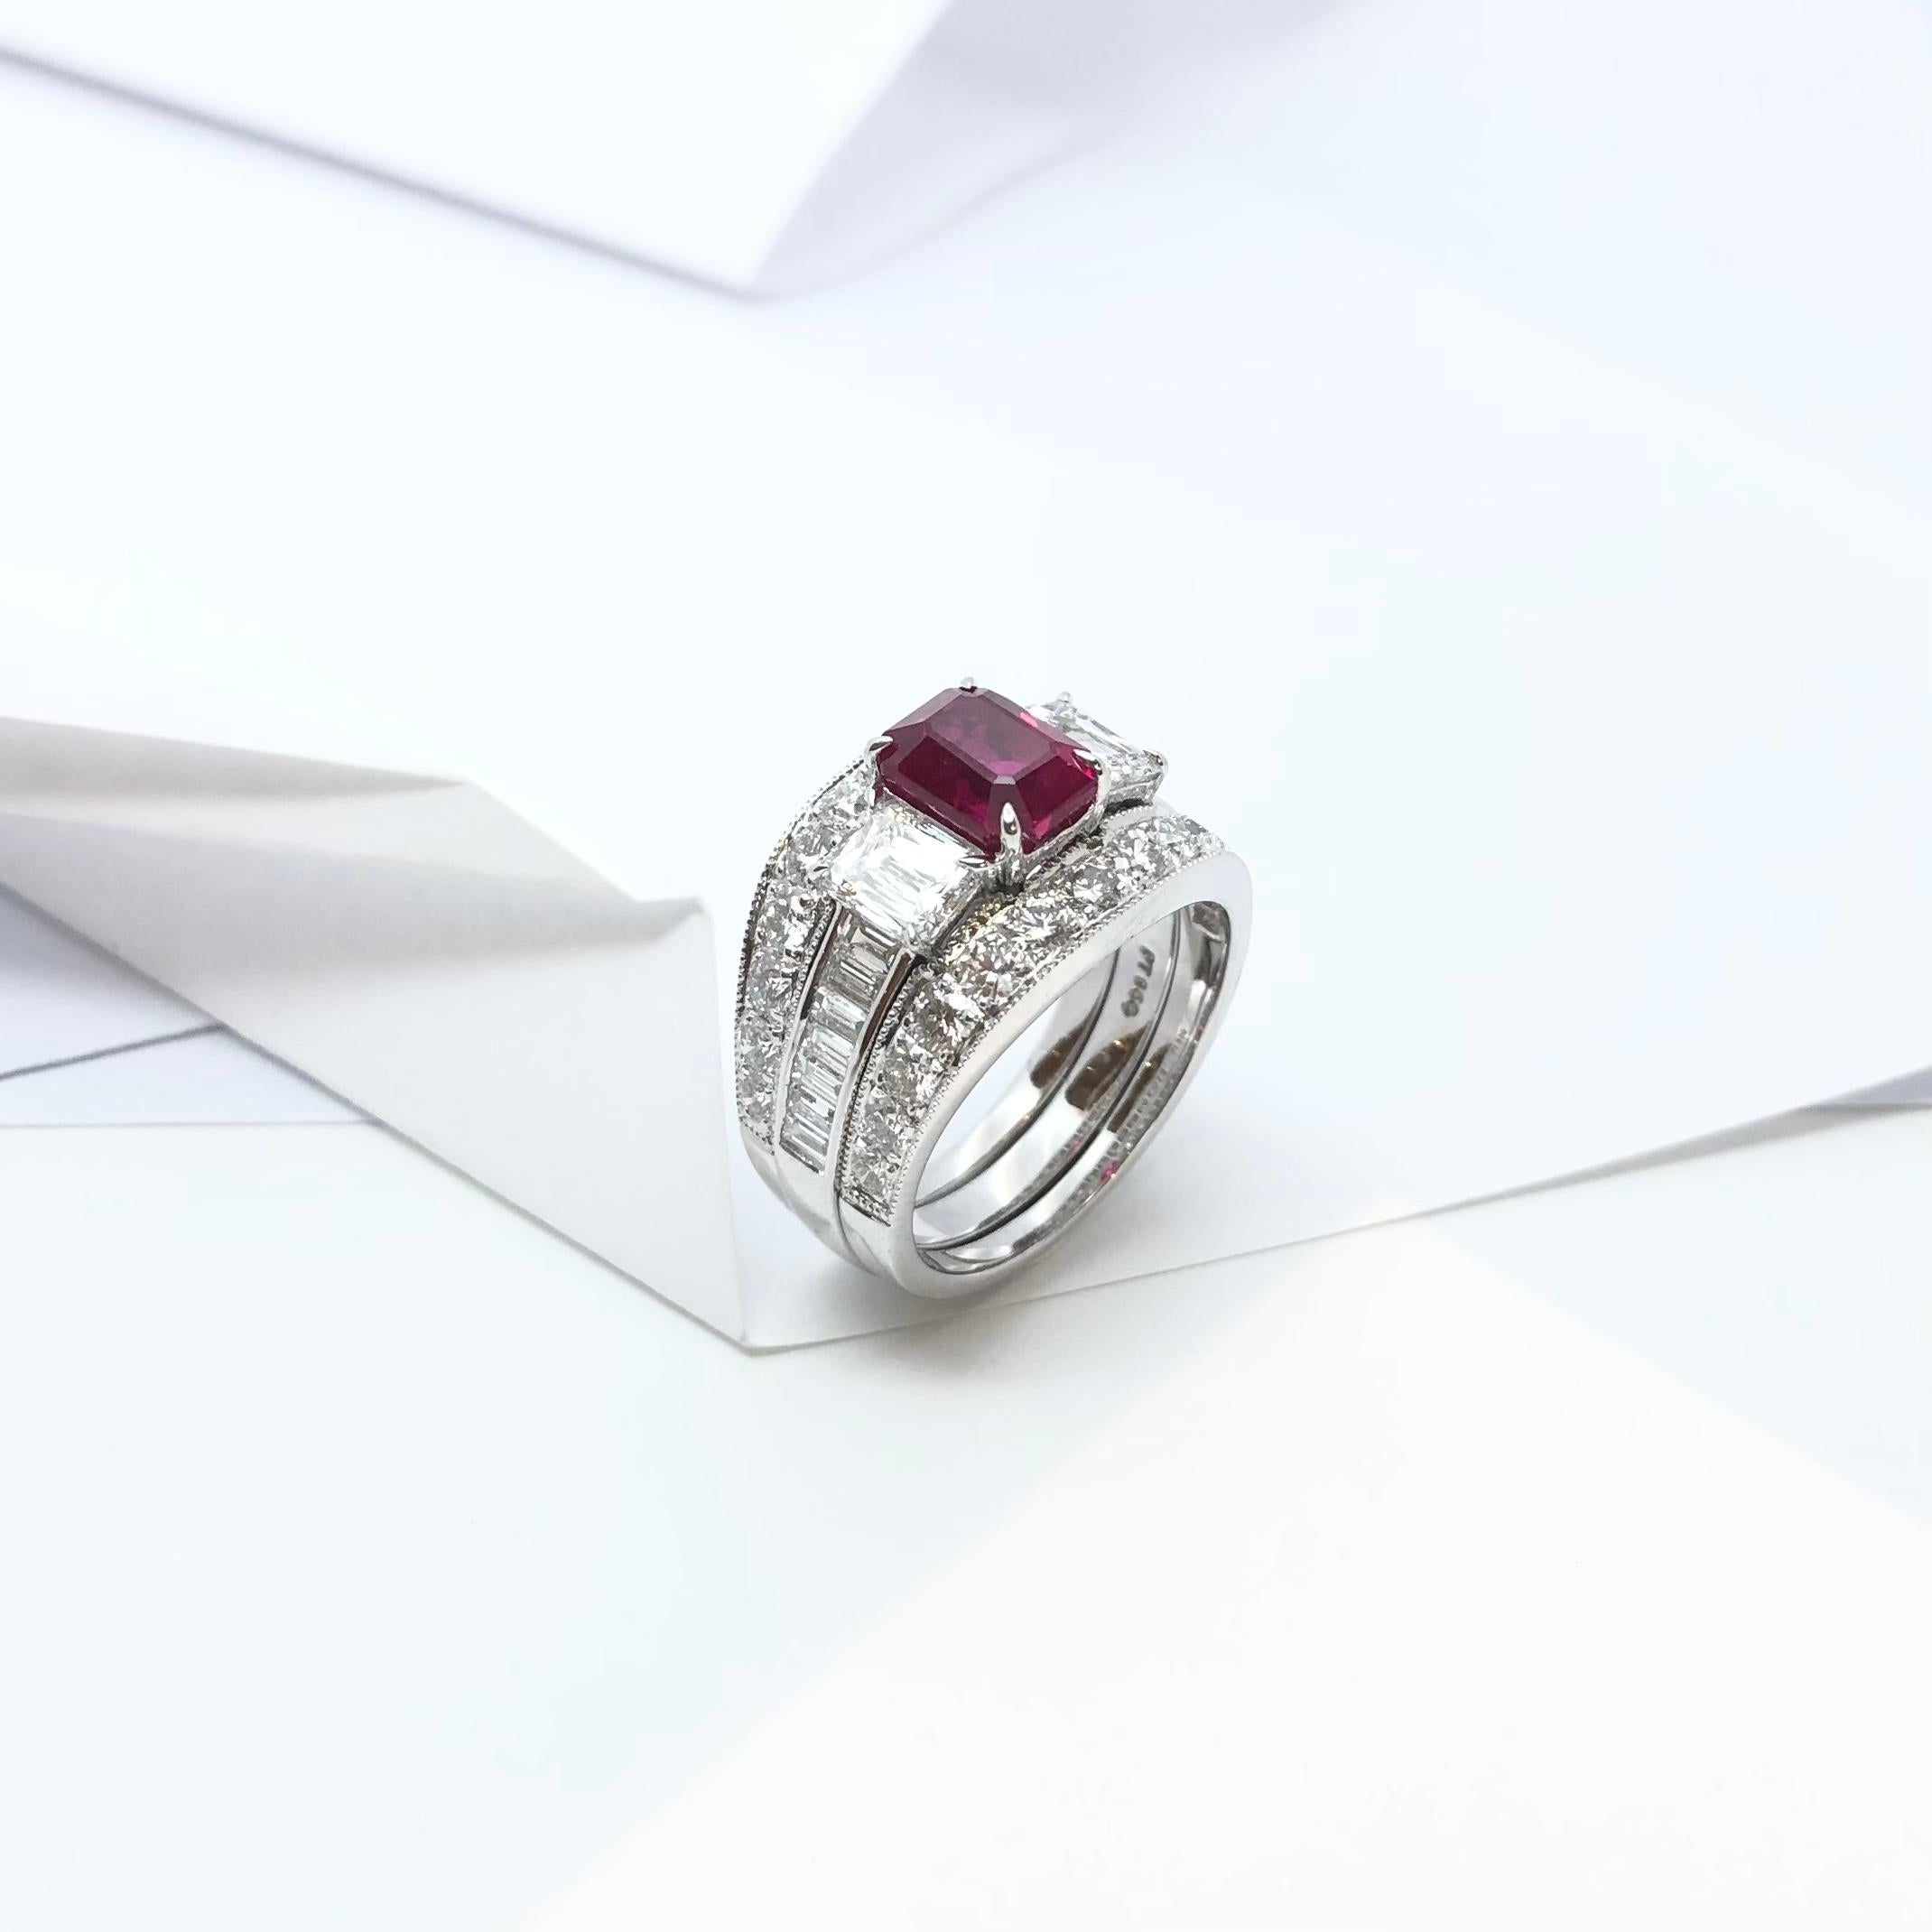 GRS Certified 2cts Pigeon's Blood Burmese Ruby with Diamond Ring in Platinum For Sale 7